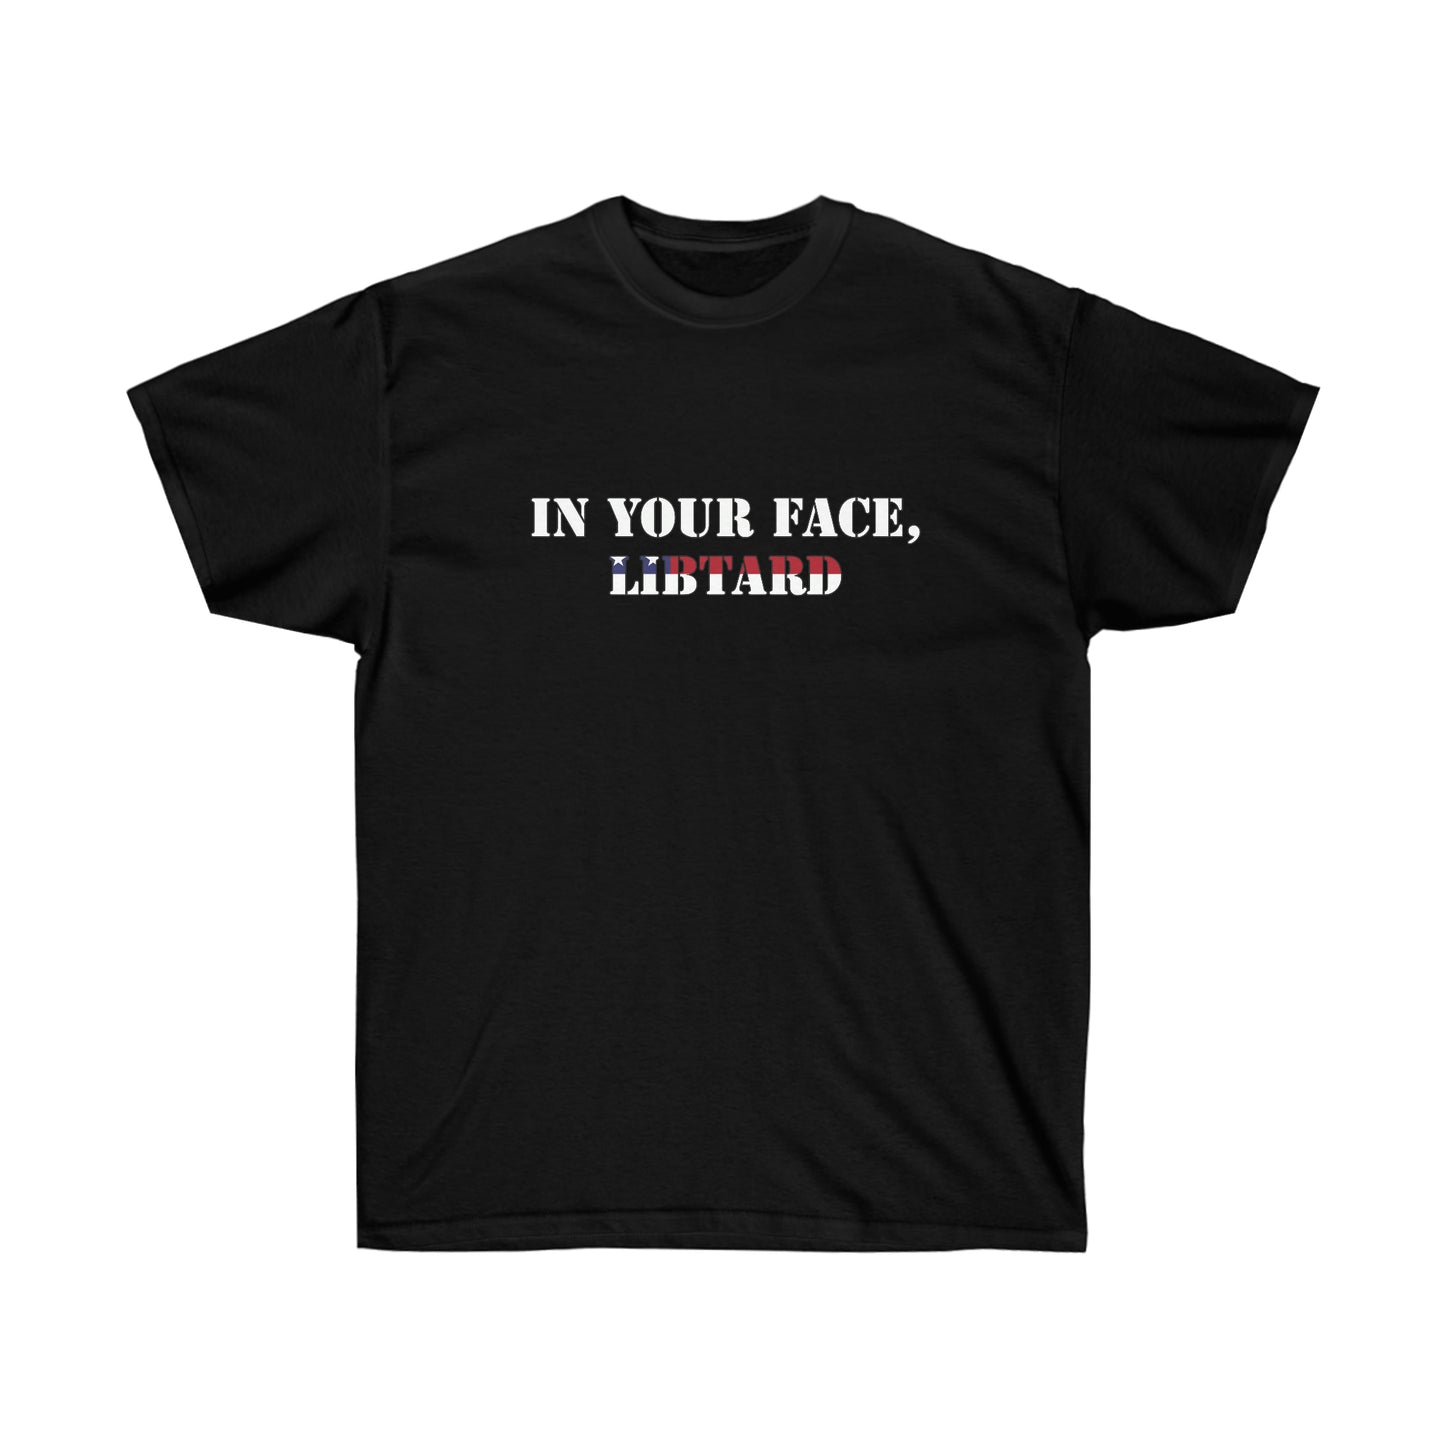 In your FACE - T-Shirt